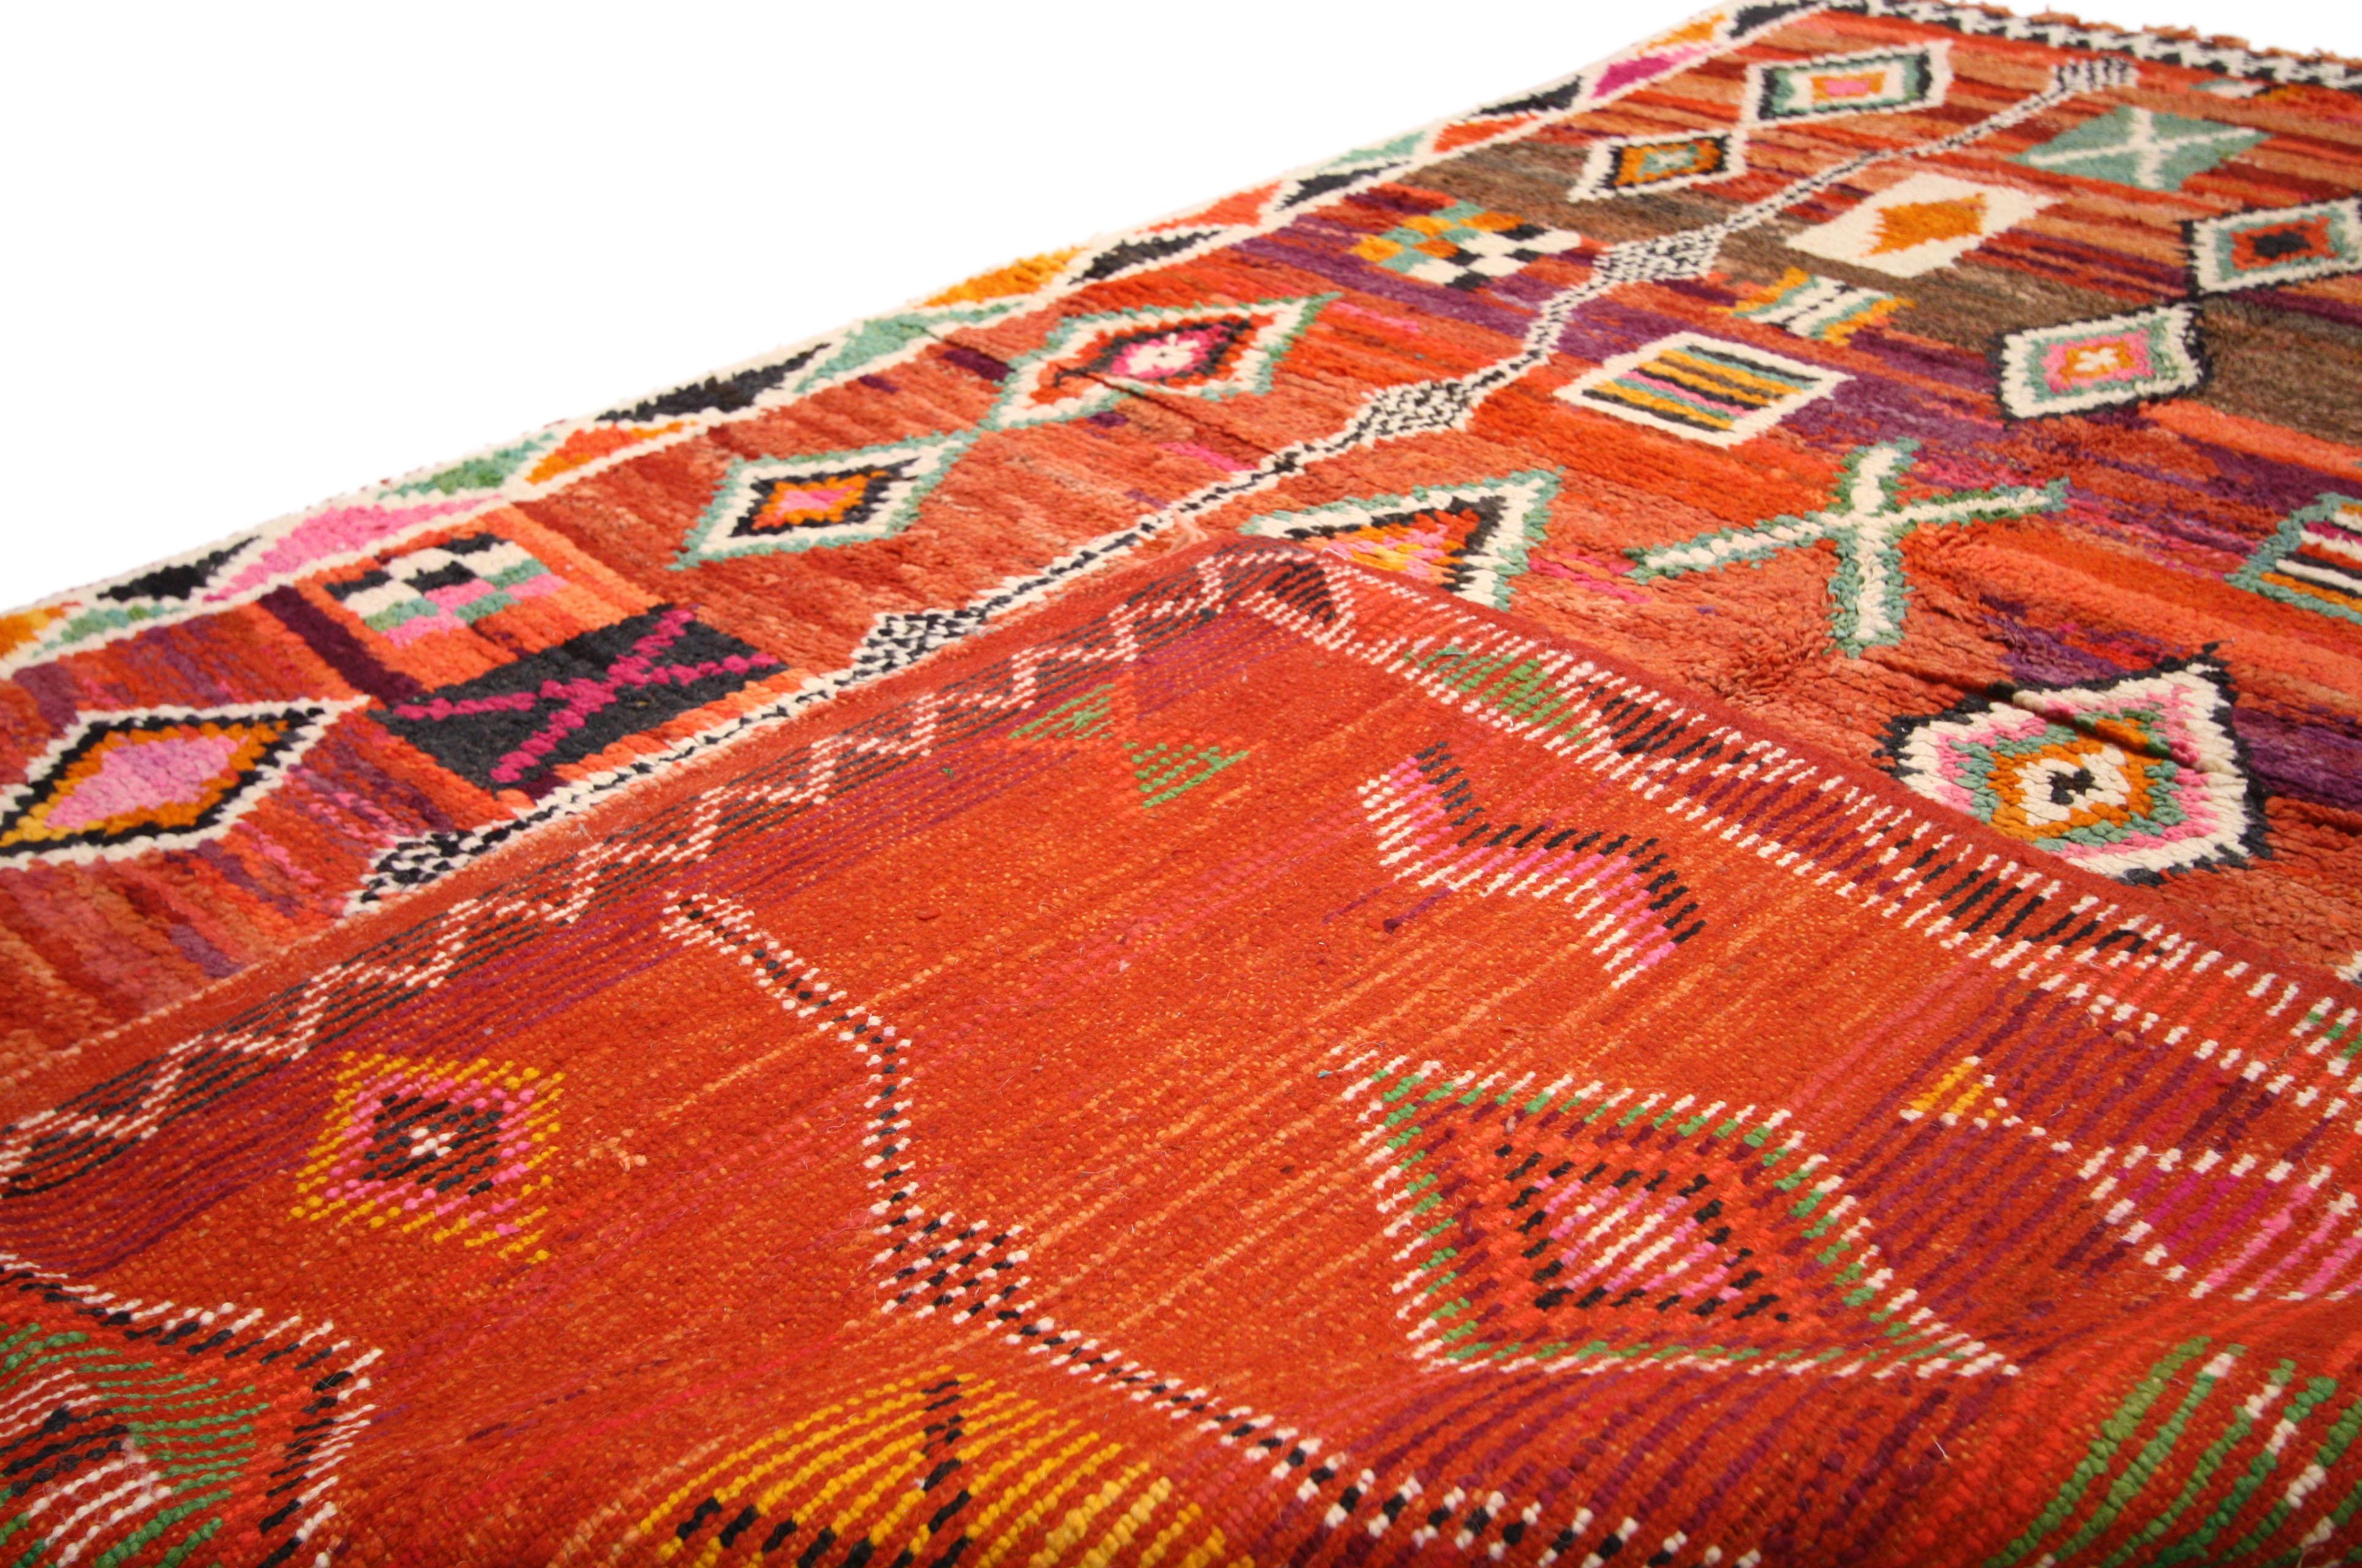 20th Century Vintage Moroccan Rug with Geometric Print, Tribal Style Berber Moroccan Area Rug